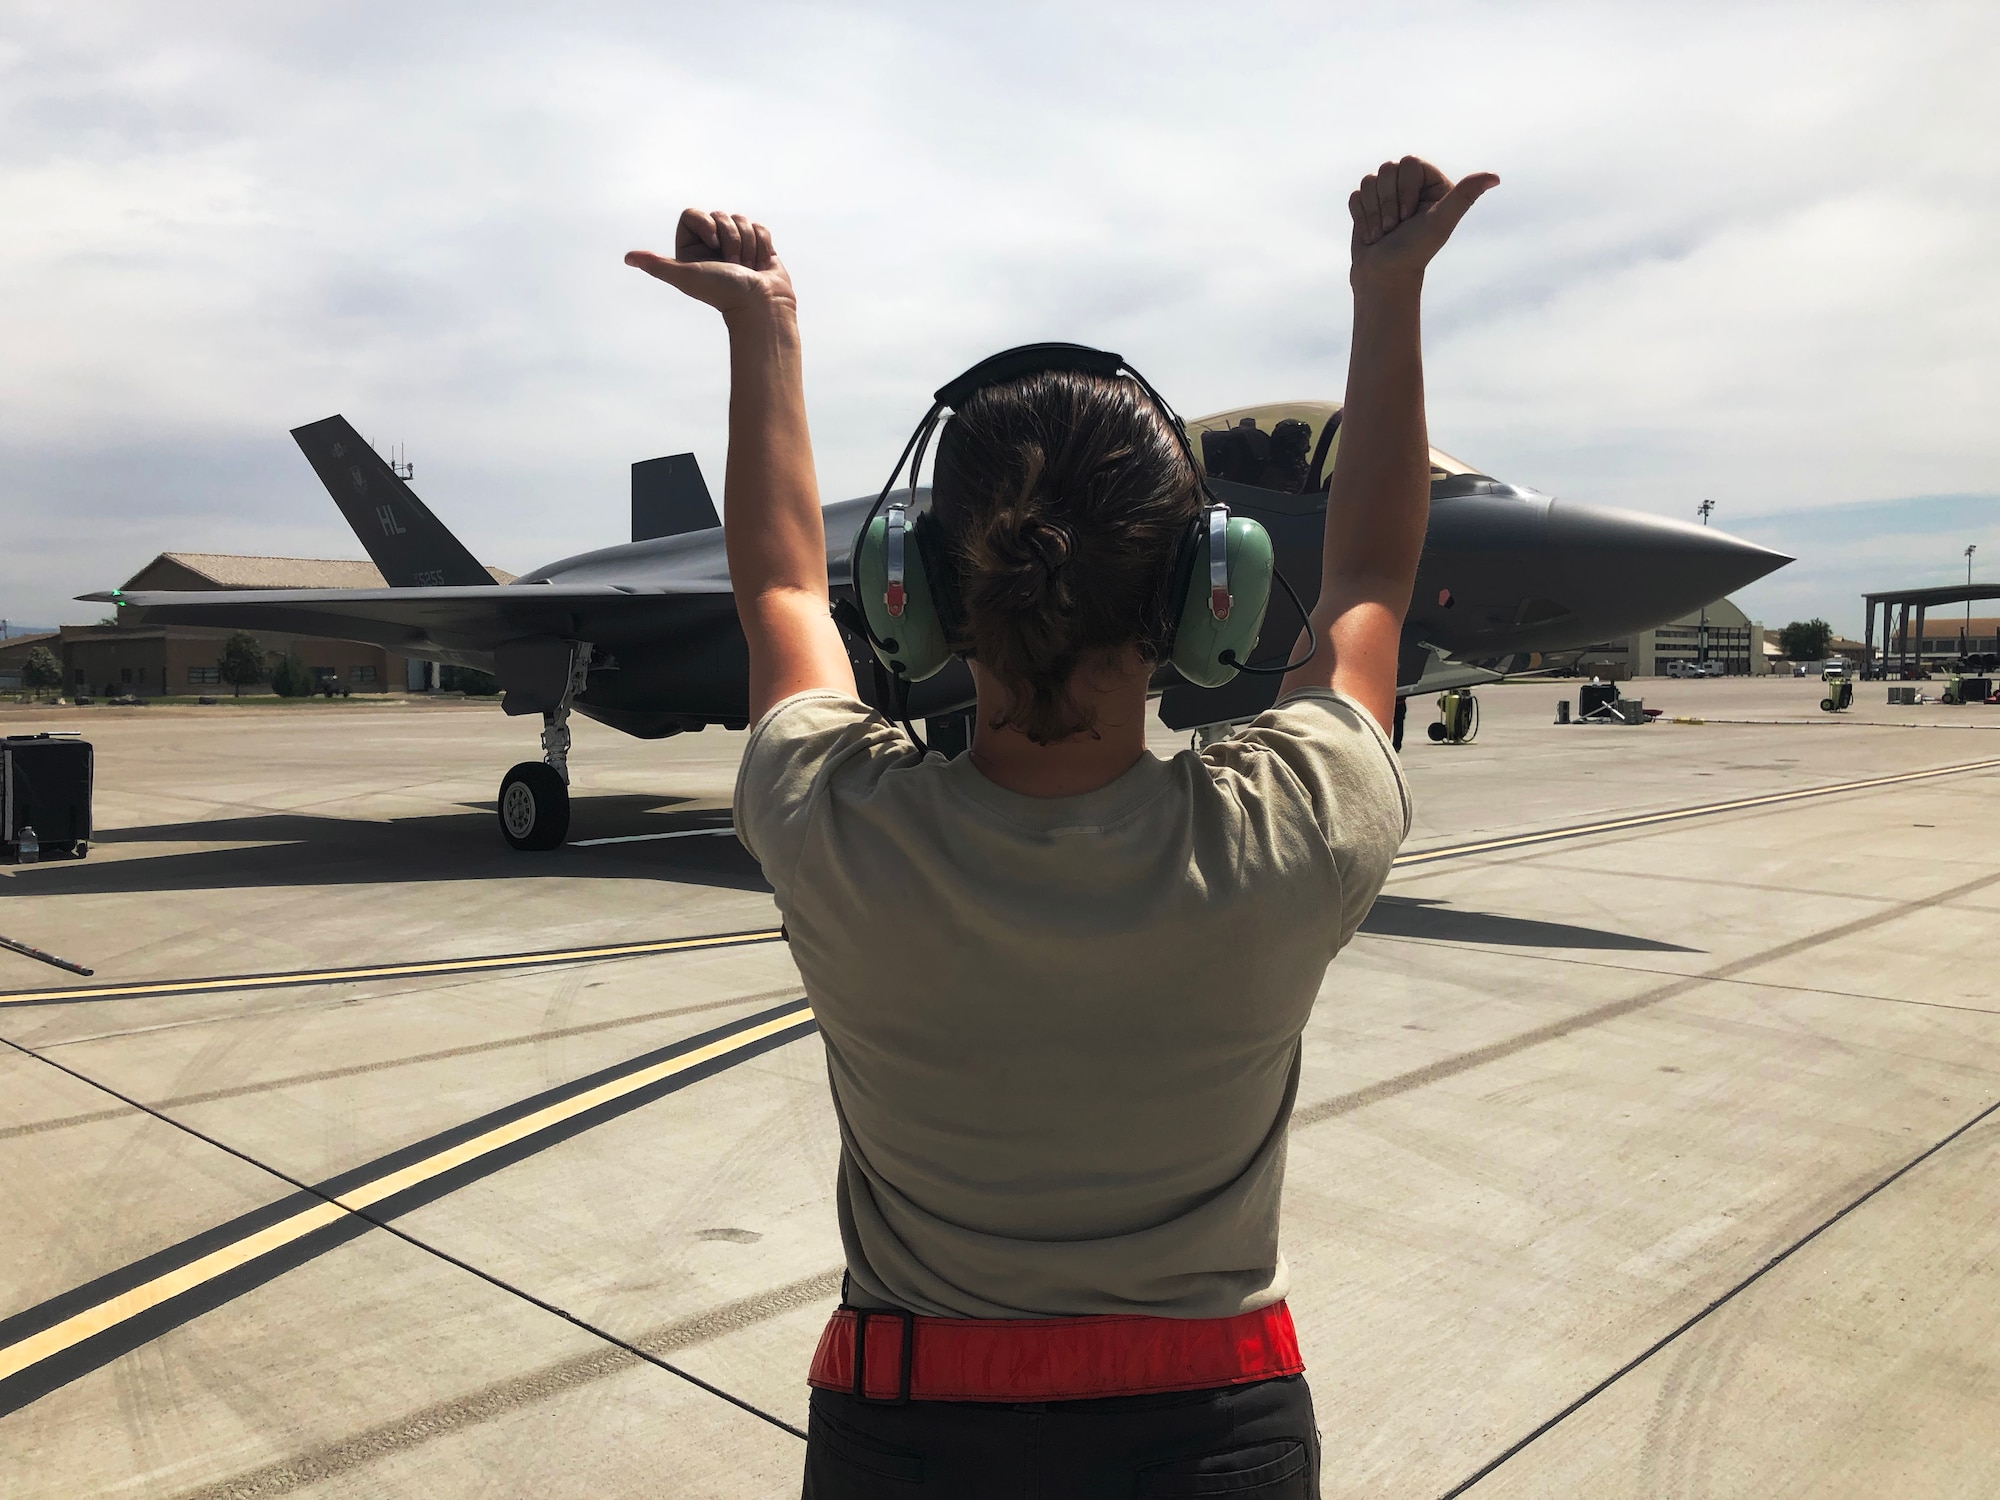 Senior Airman Cheyenne Rust, an F-35A crew chief with the 388th Fighter Wing's 34th Fighter Squadron, currently deployed to Mountain Home Air Force Base, Idaho, marshals a jet prior to the first sorties of the day July 10. (U.S. Air Force photo by Micah Garbarino)